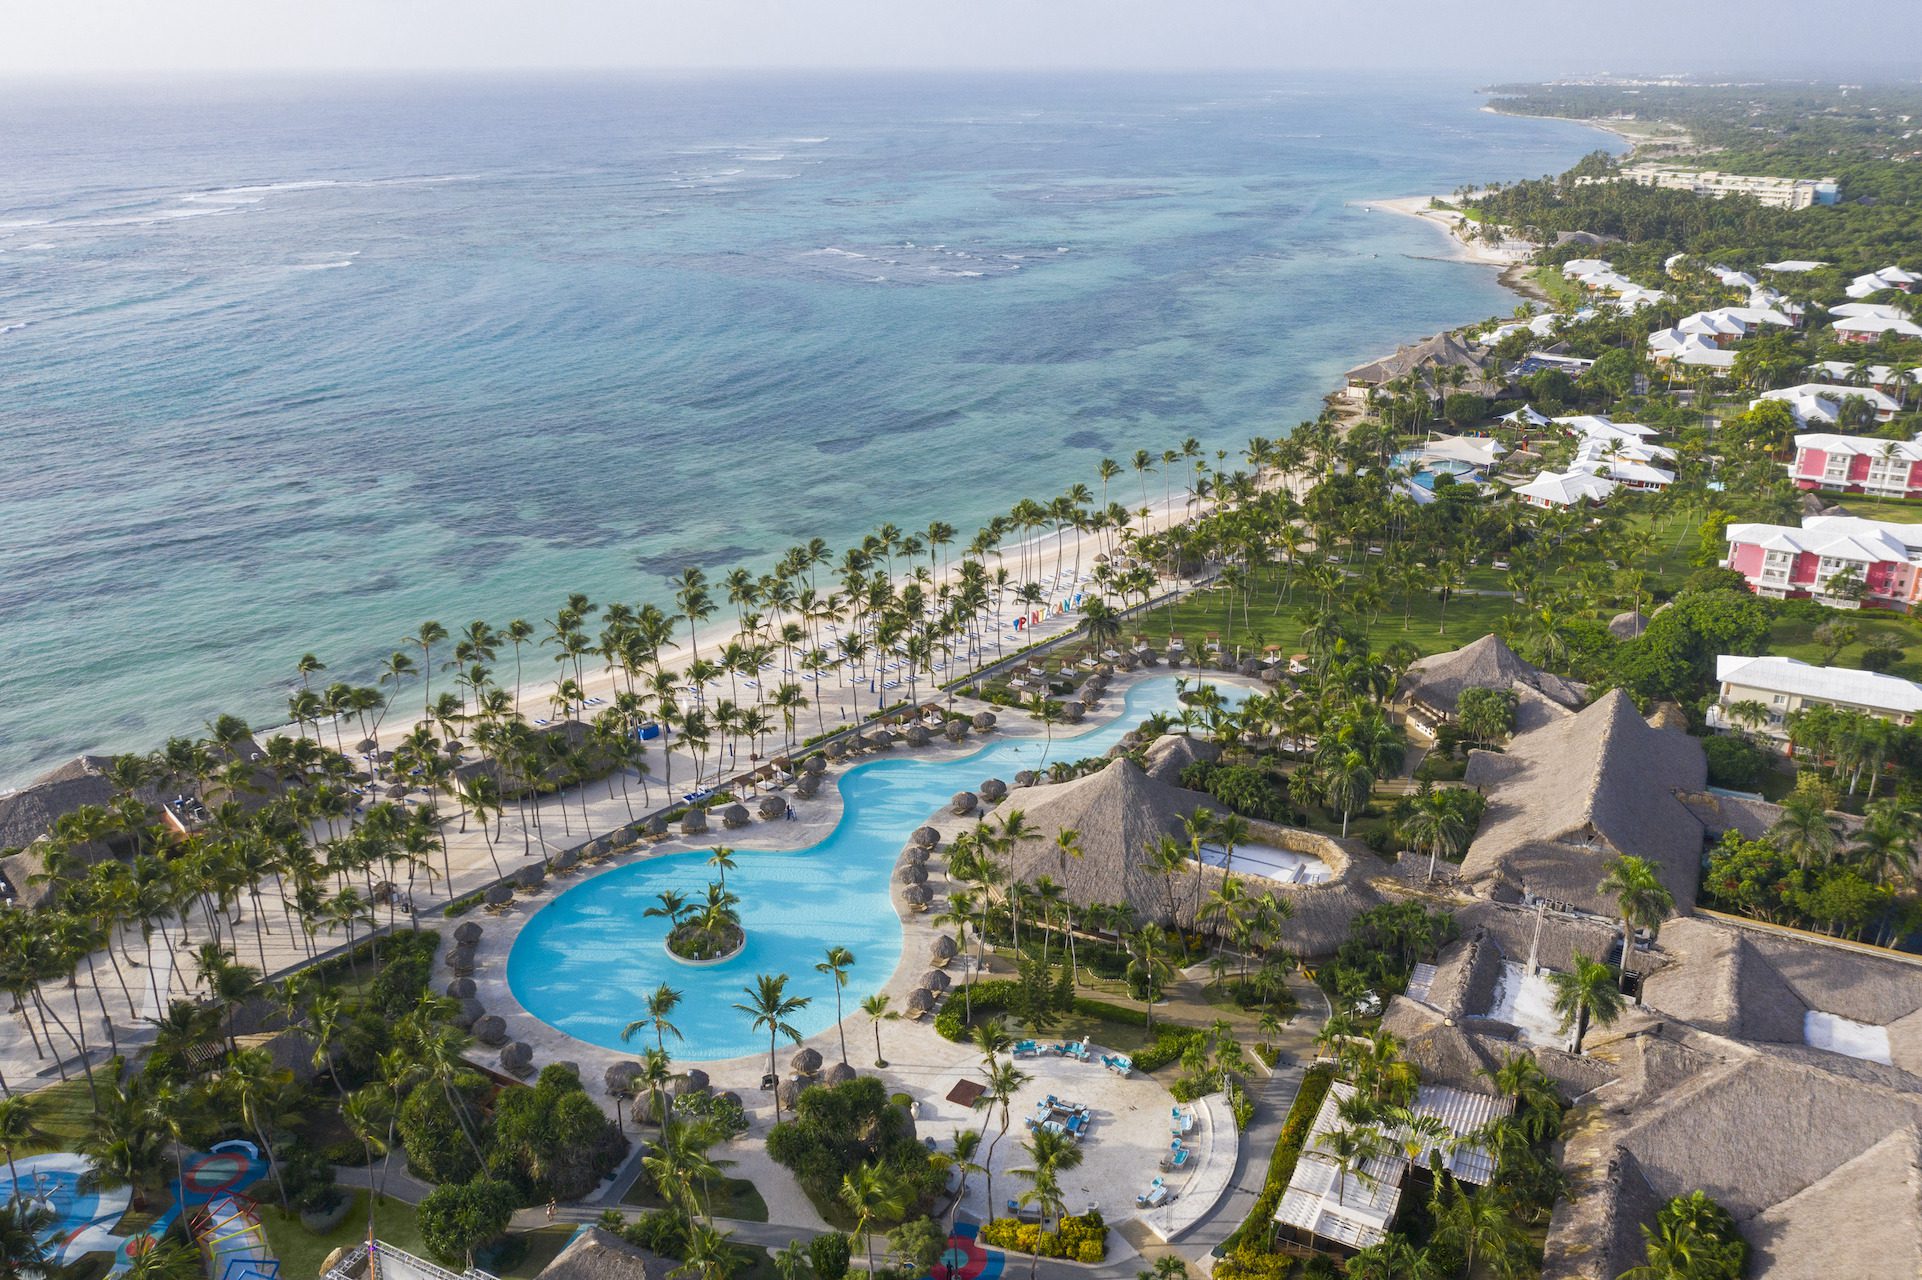 10 Best All-Inclusive Beach Resorts in the World (2023) - FamilyVacationist